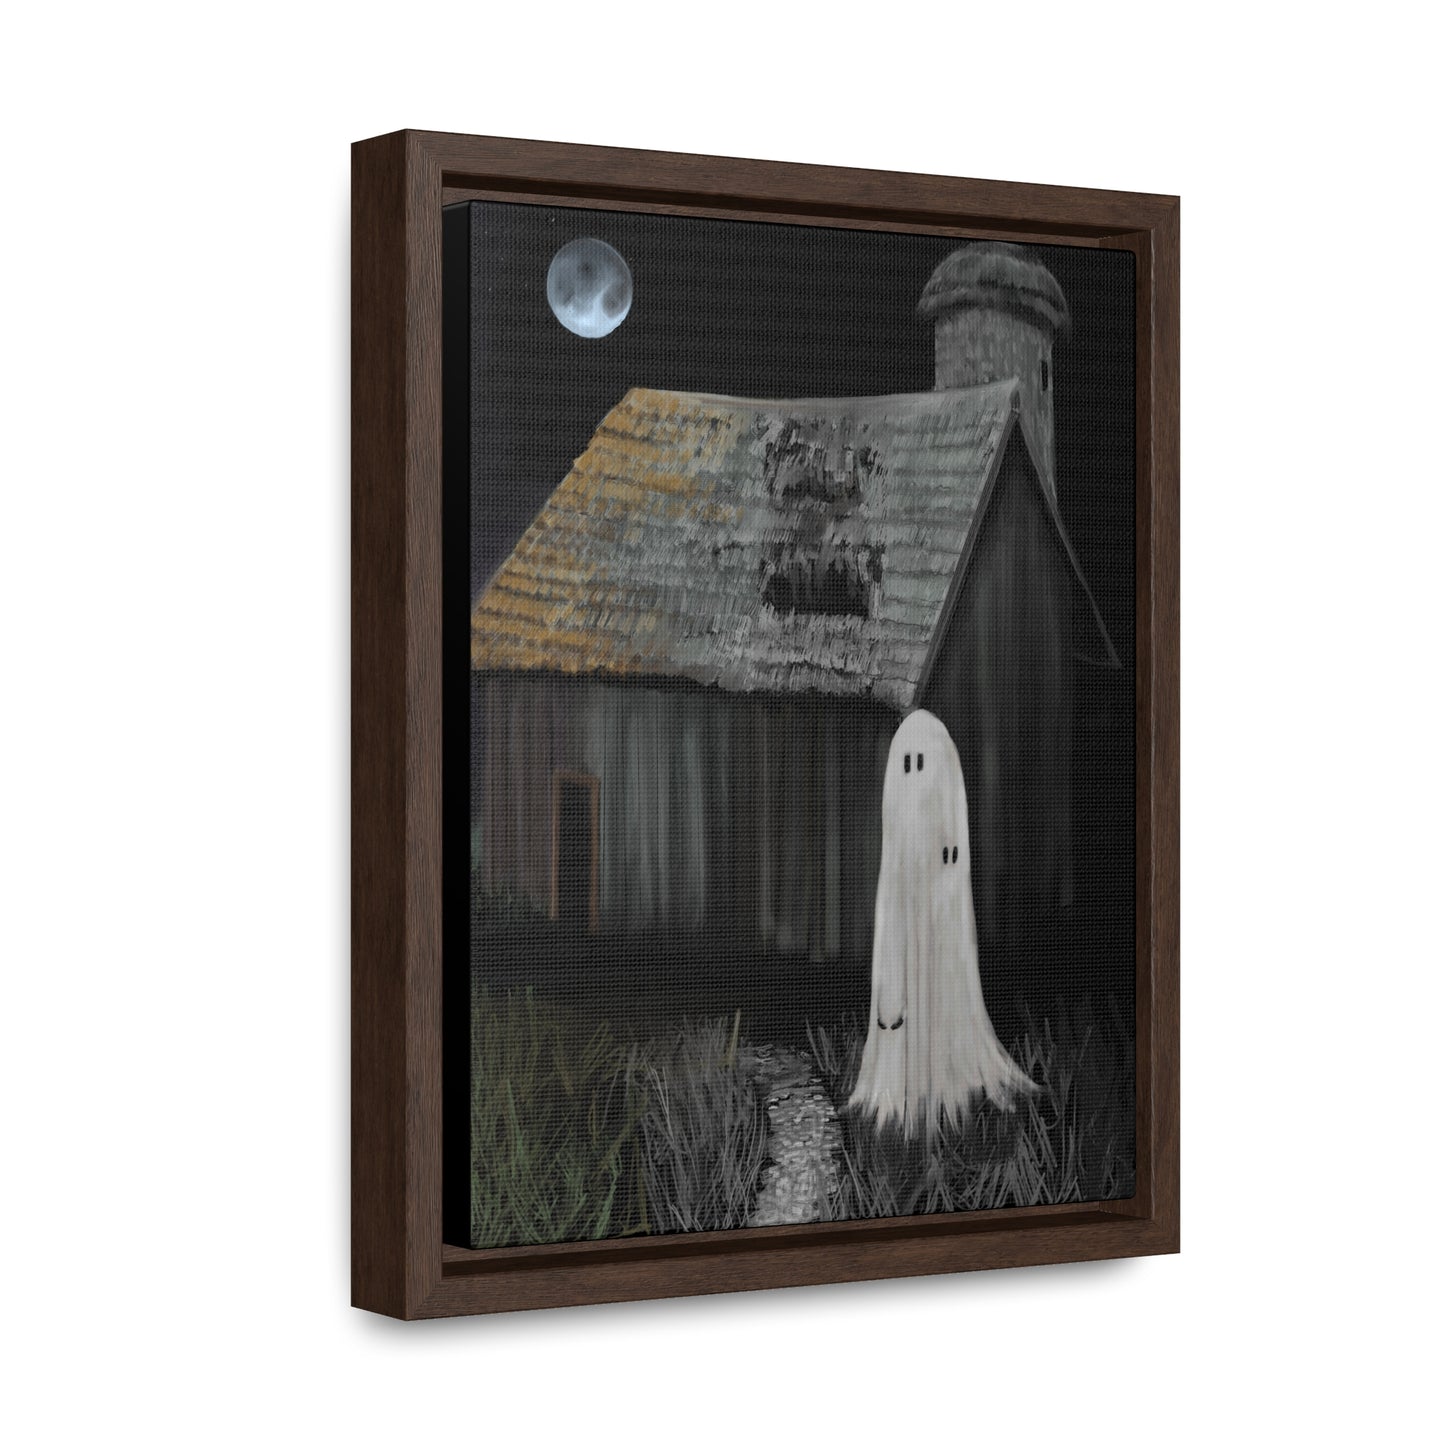 Haunted Barn Gallery Canvas Wrap, Vertical Frame